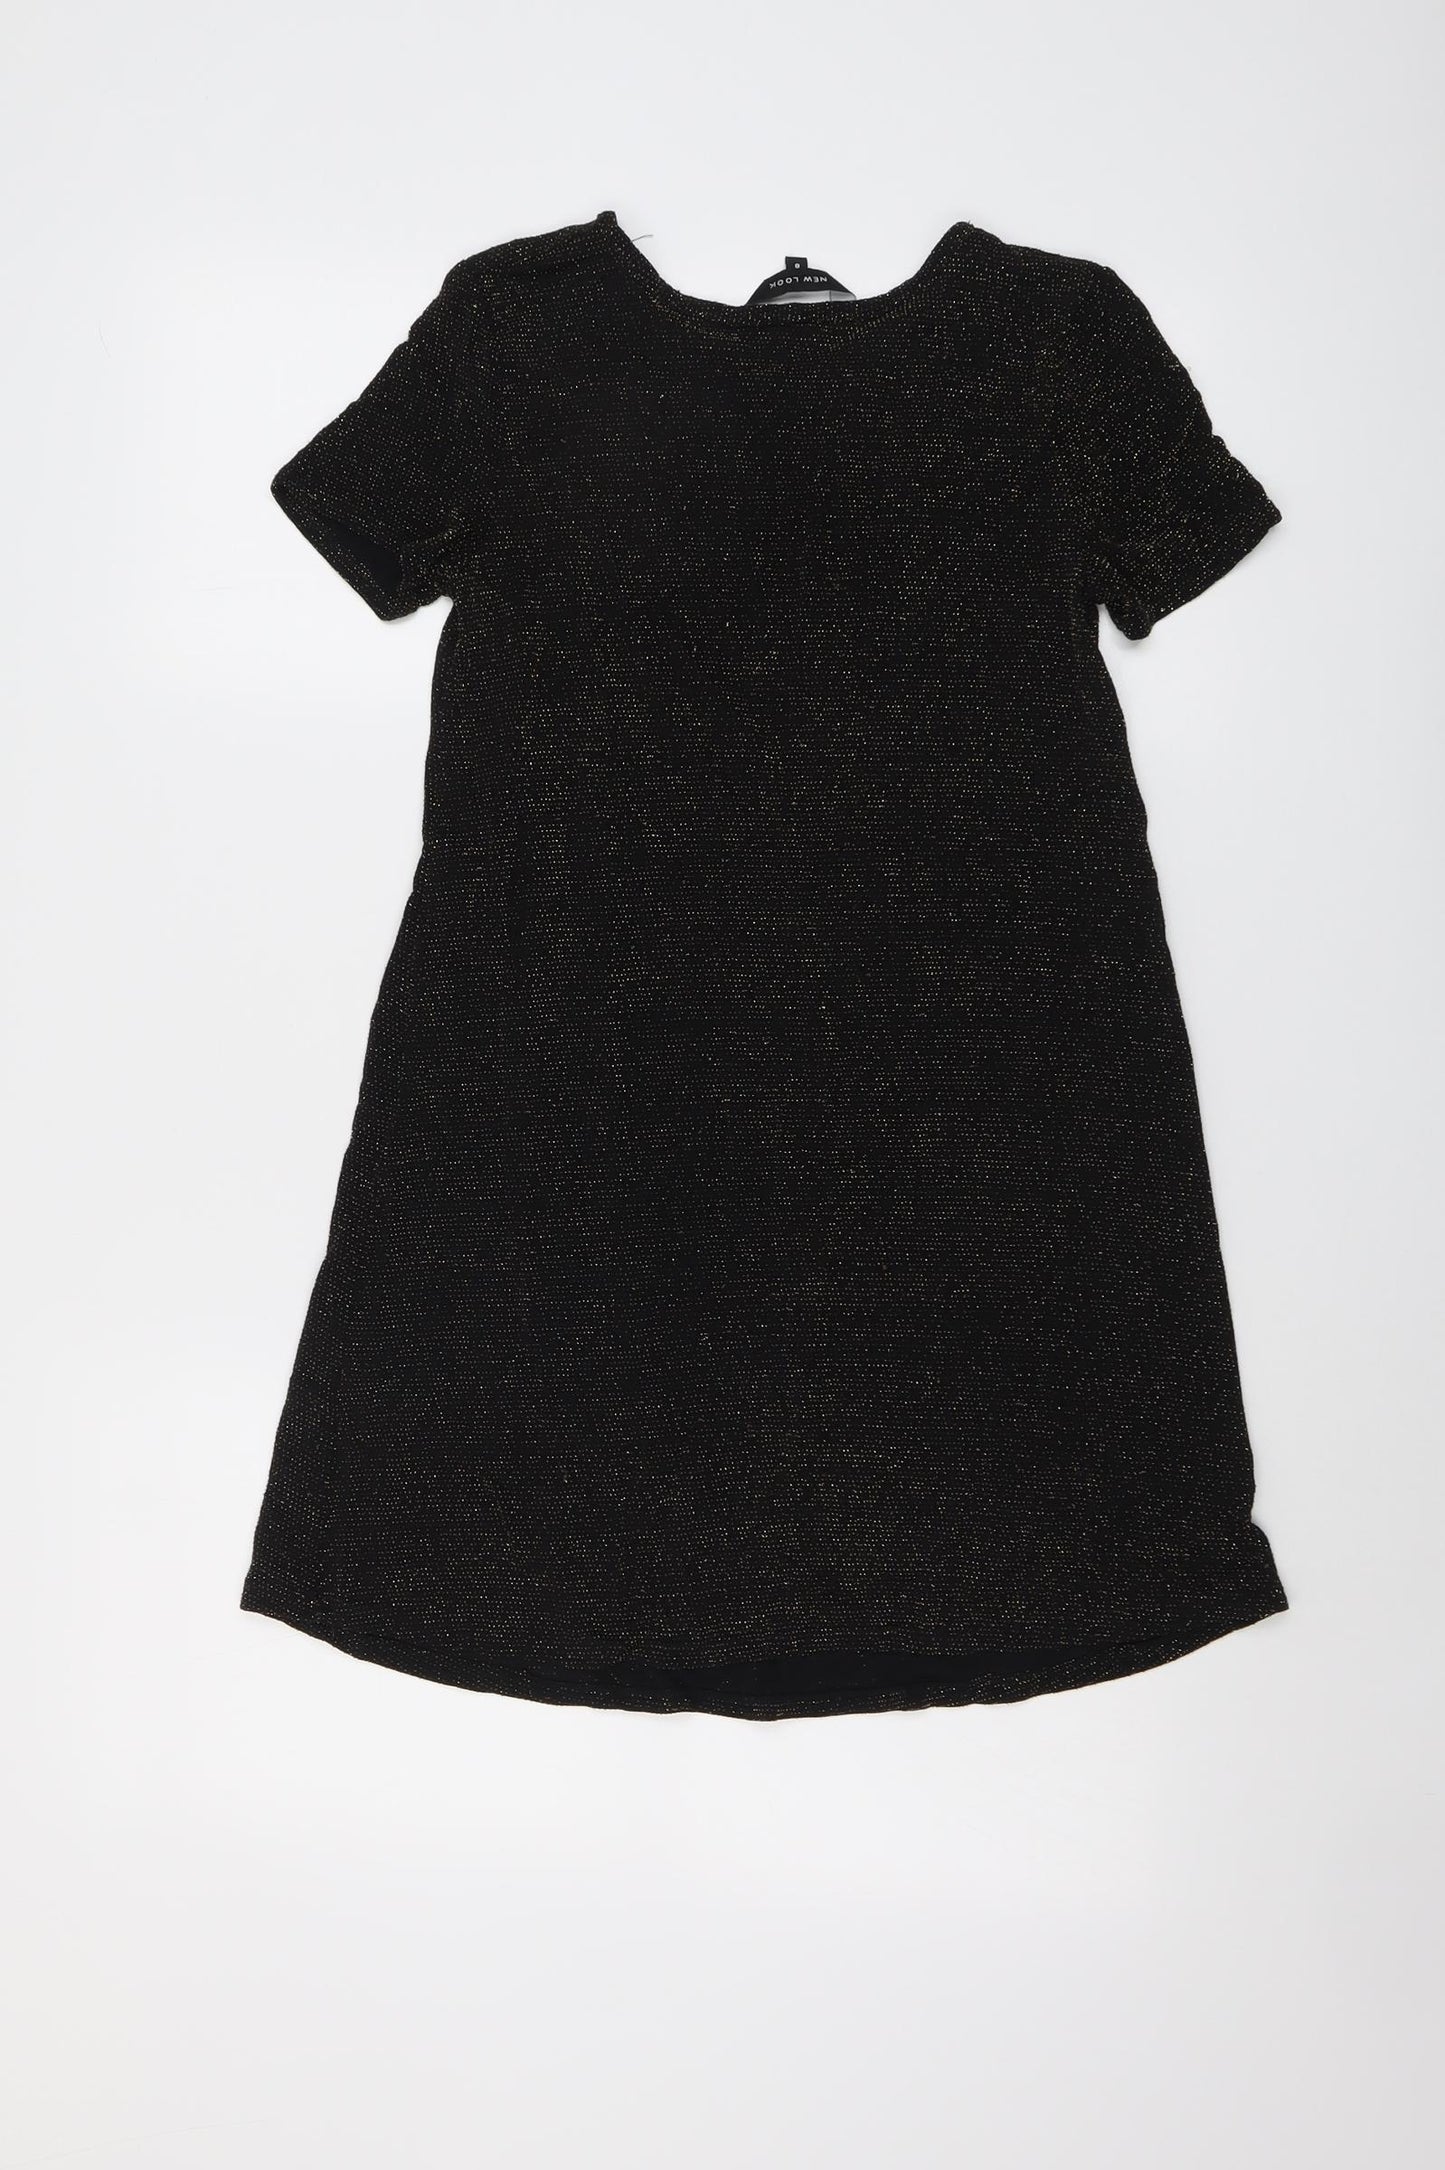 New Look Womens Black Geometric Polyester T-Shirt Dress Size 8 Round Neck Pullover